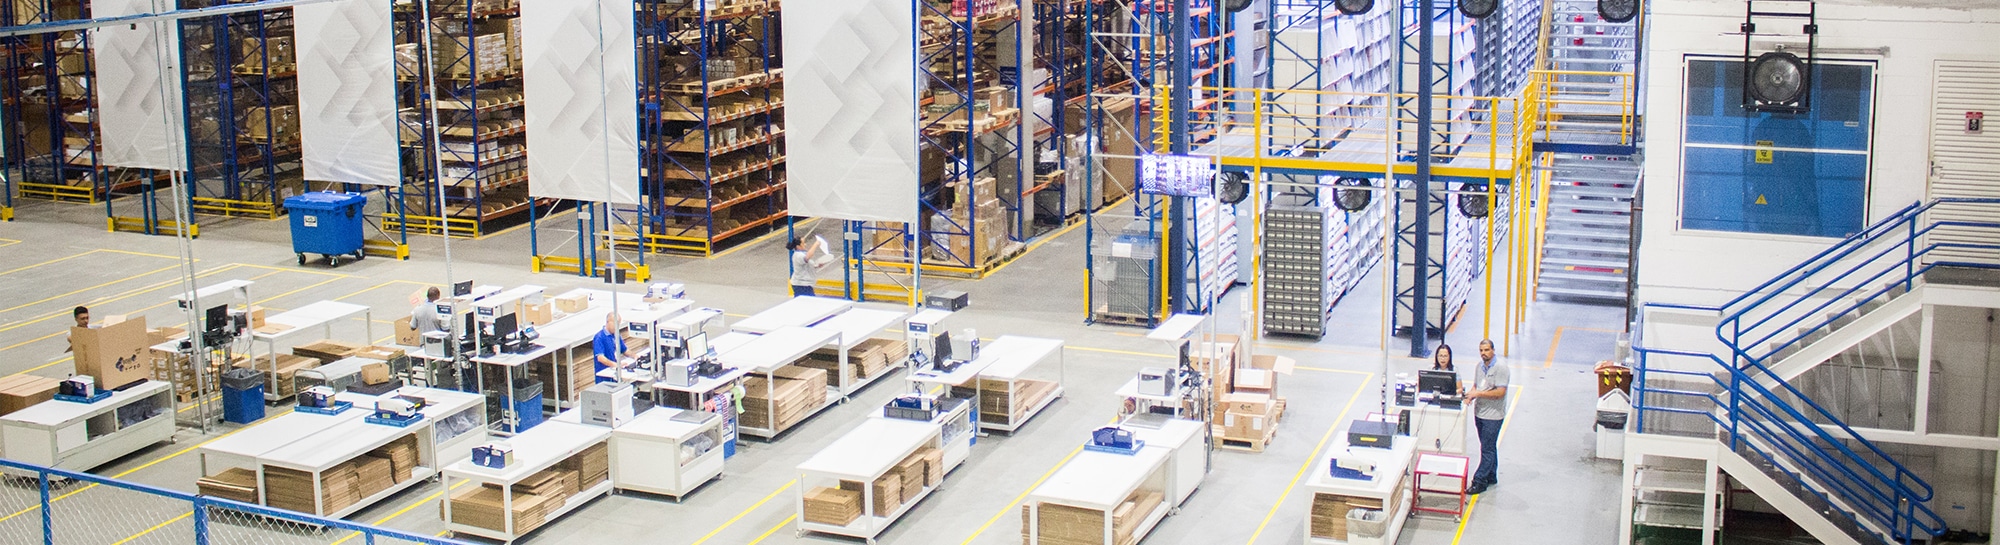 Order fulfilment for e-commerce: How to increase efficiency and reduce mistakes?